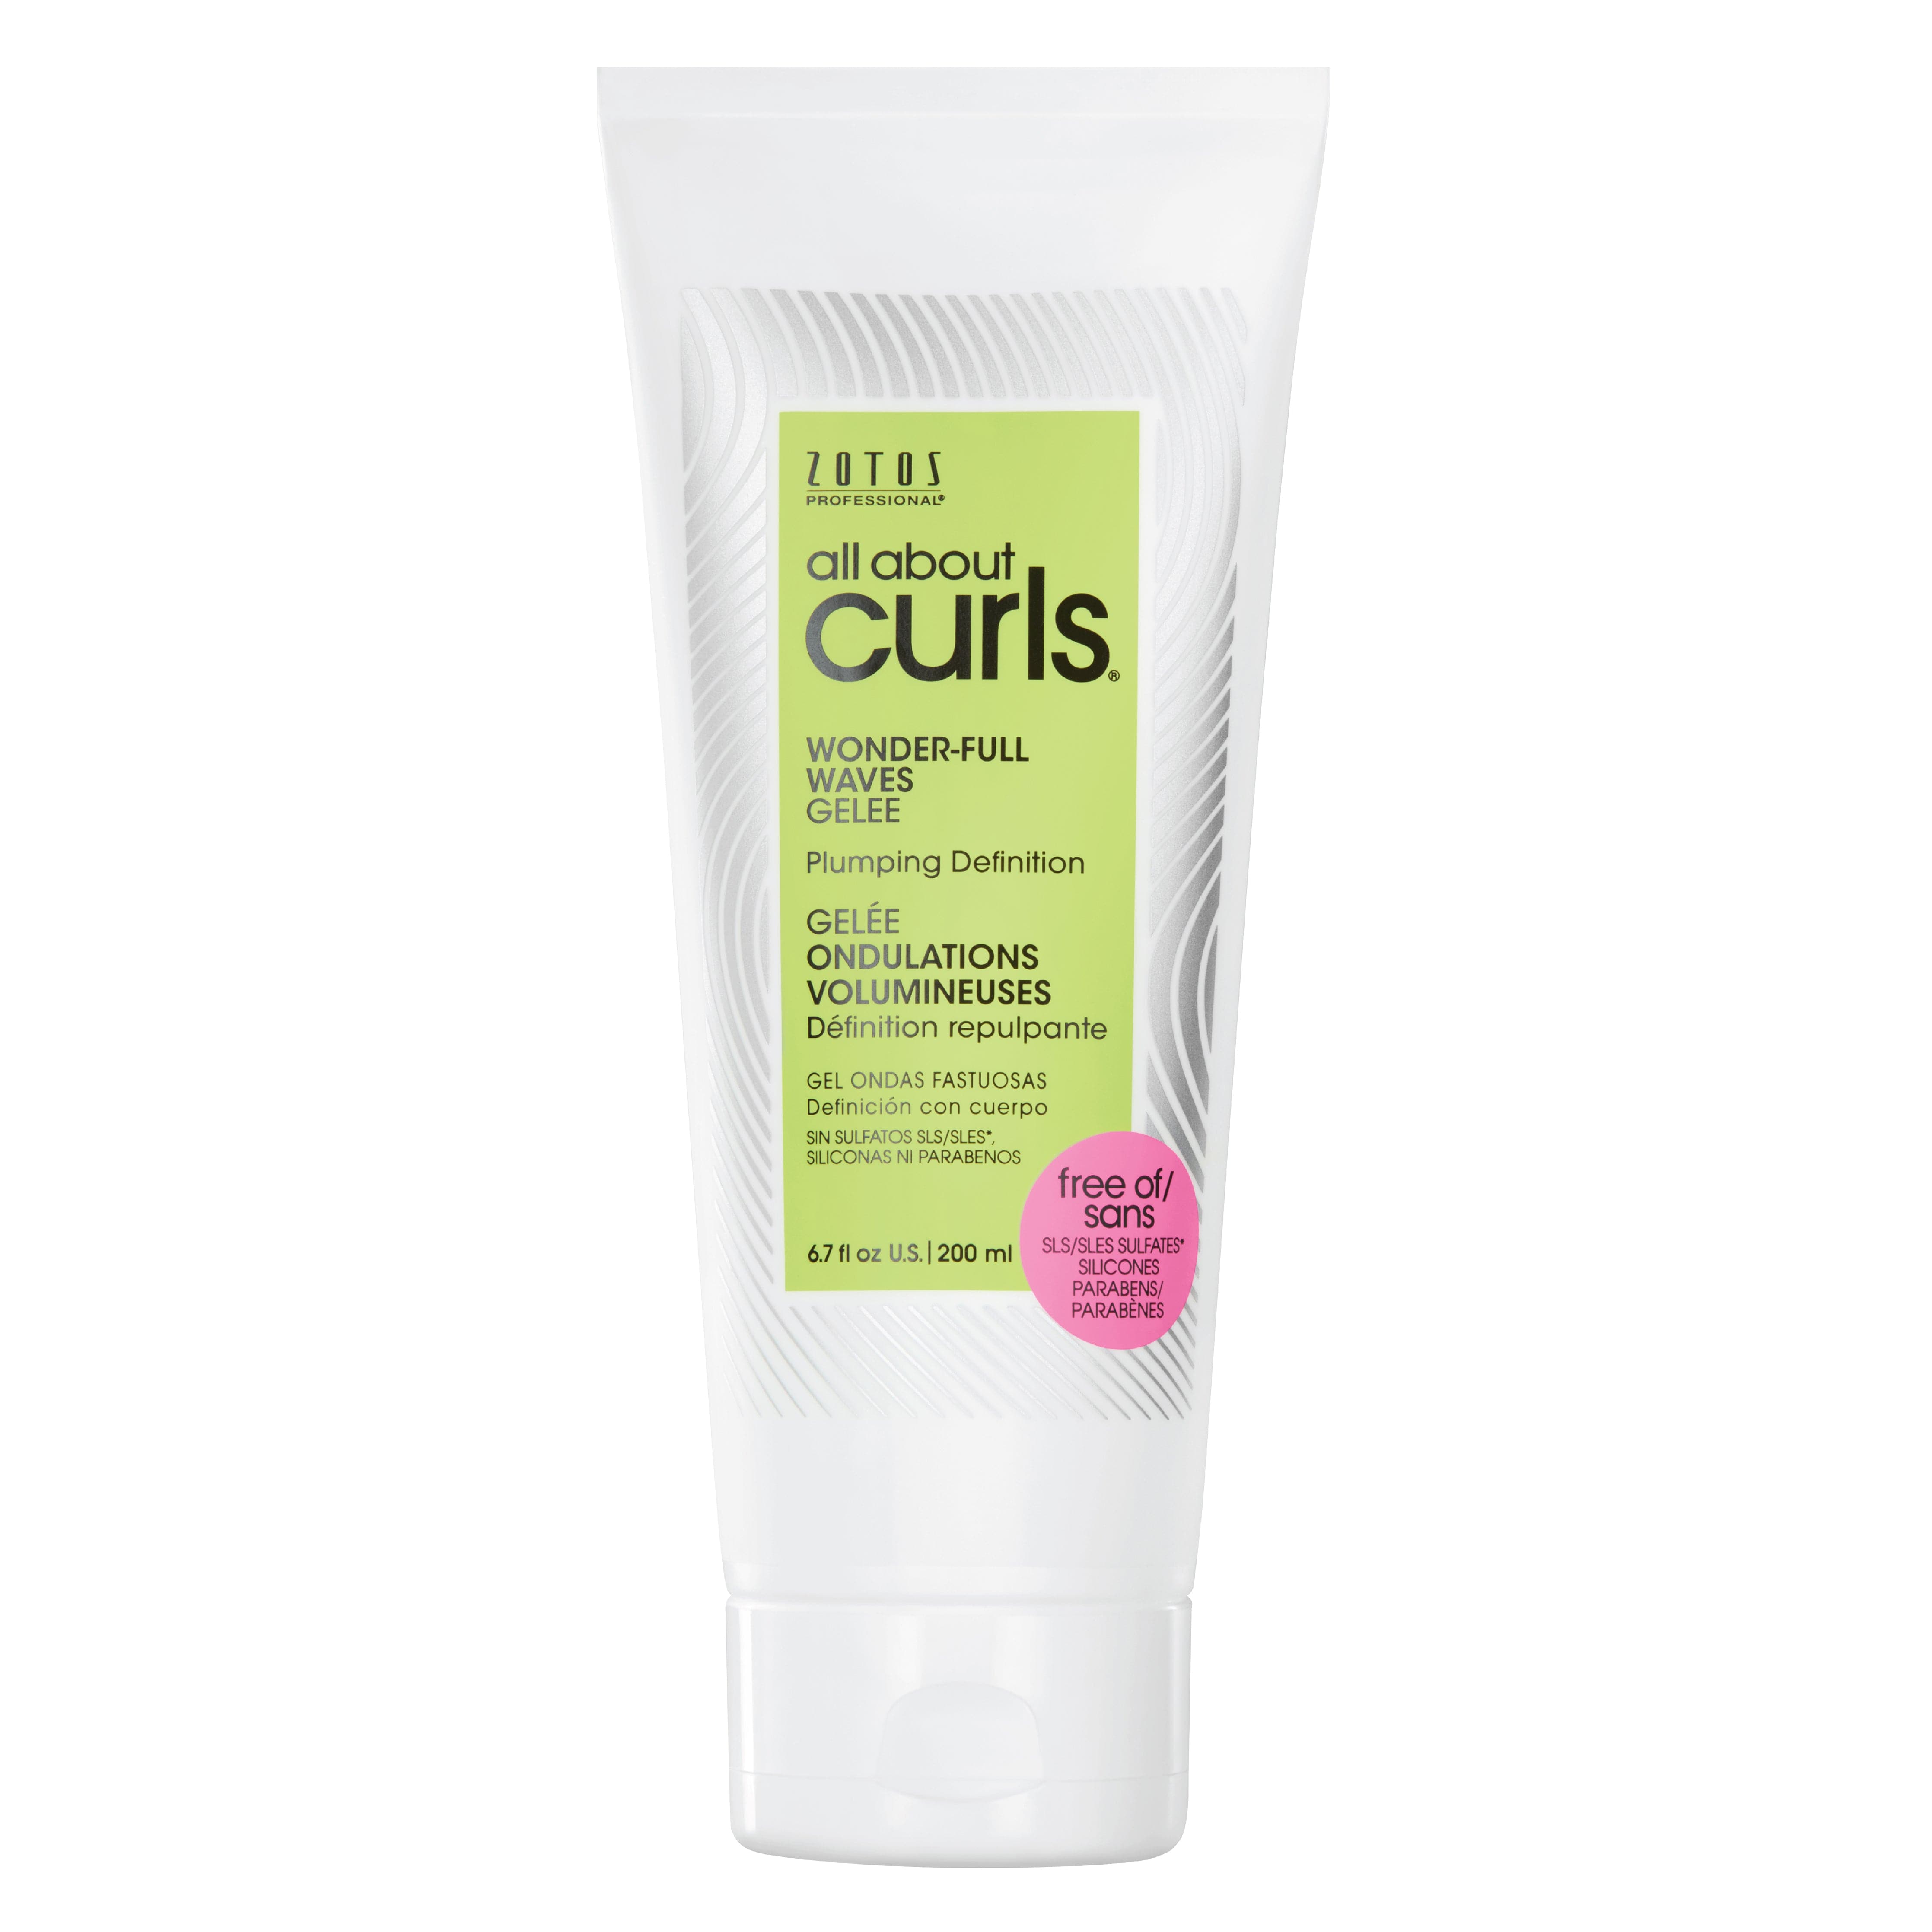 All About Curls® Wonder-Full Waves Plumping Gelee